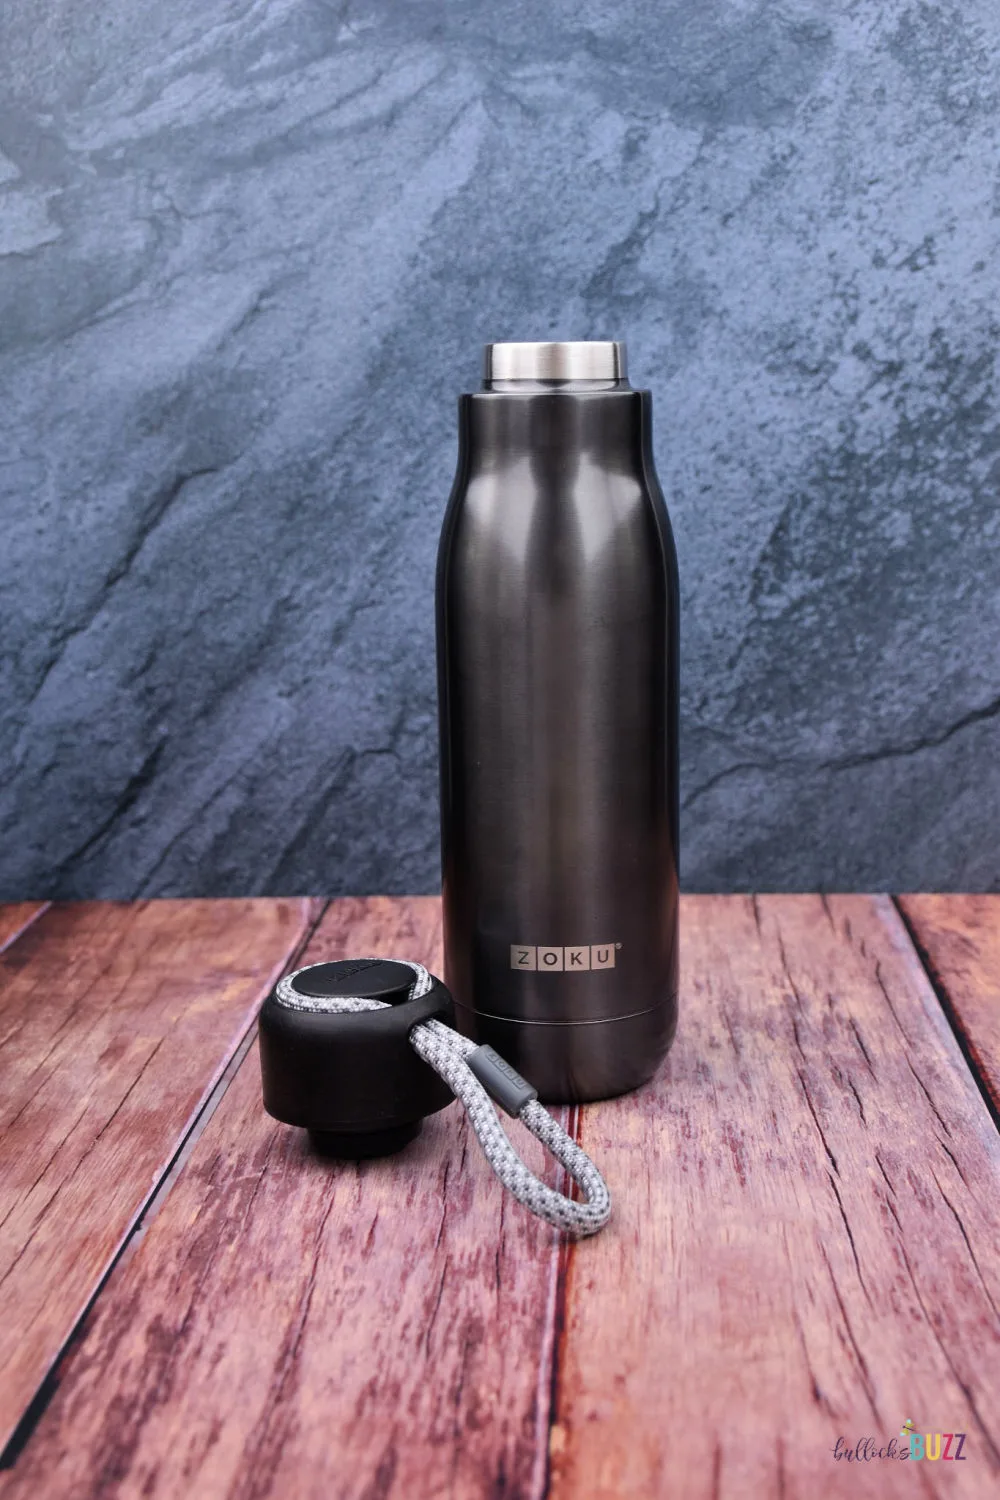 The best water bottles should be convenient, functional, and safe from harmful chemicals., just like this Zoku Stainless Steel Water Bottle.